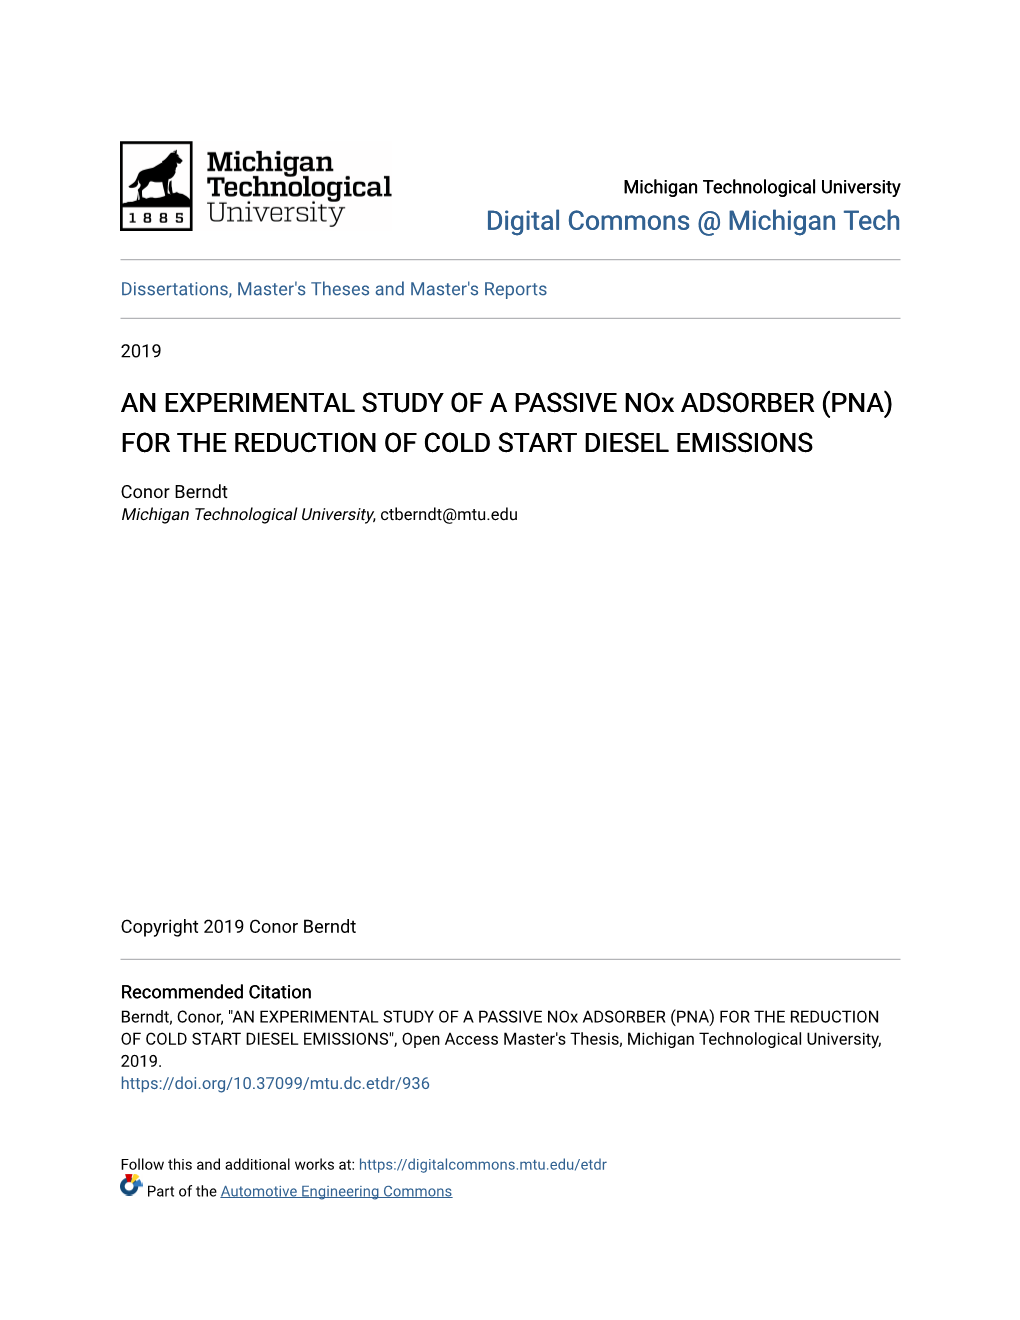 AN EXPERIMENTAL STUDY of a PASSIVE Nox ADSORBER (PNA) for the REDUCTION of COLD START DIESEL EMISSIONS